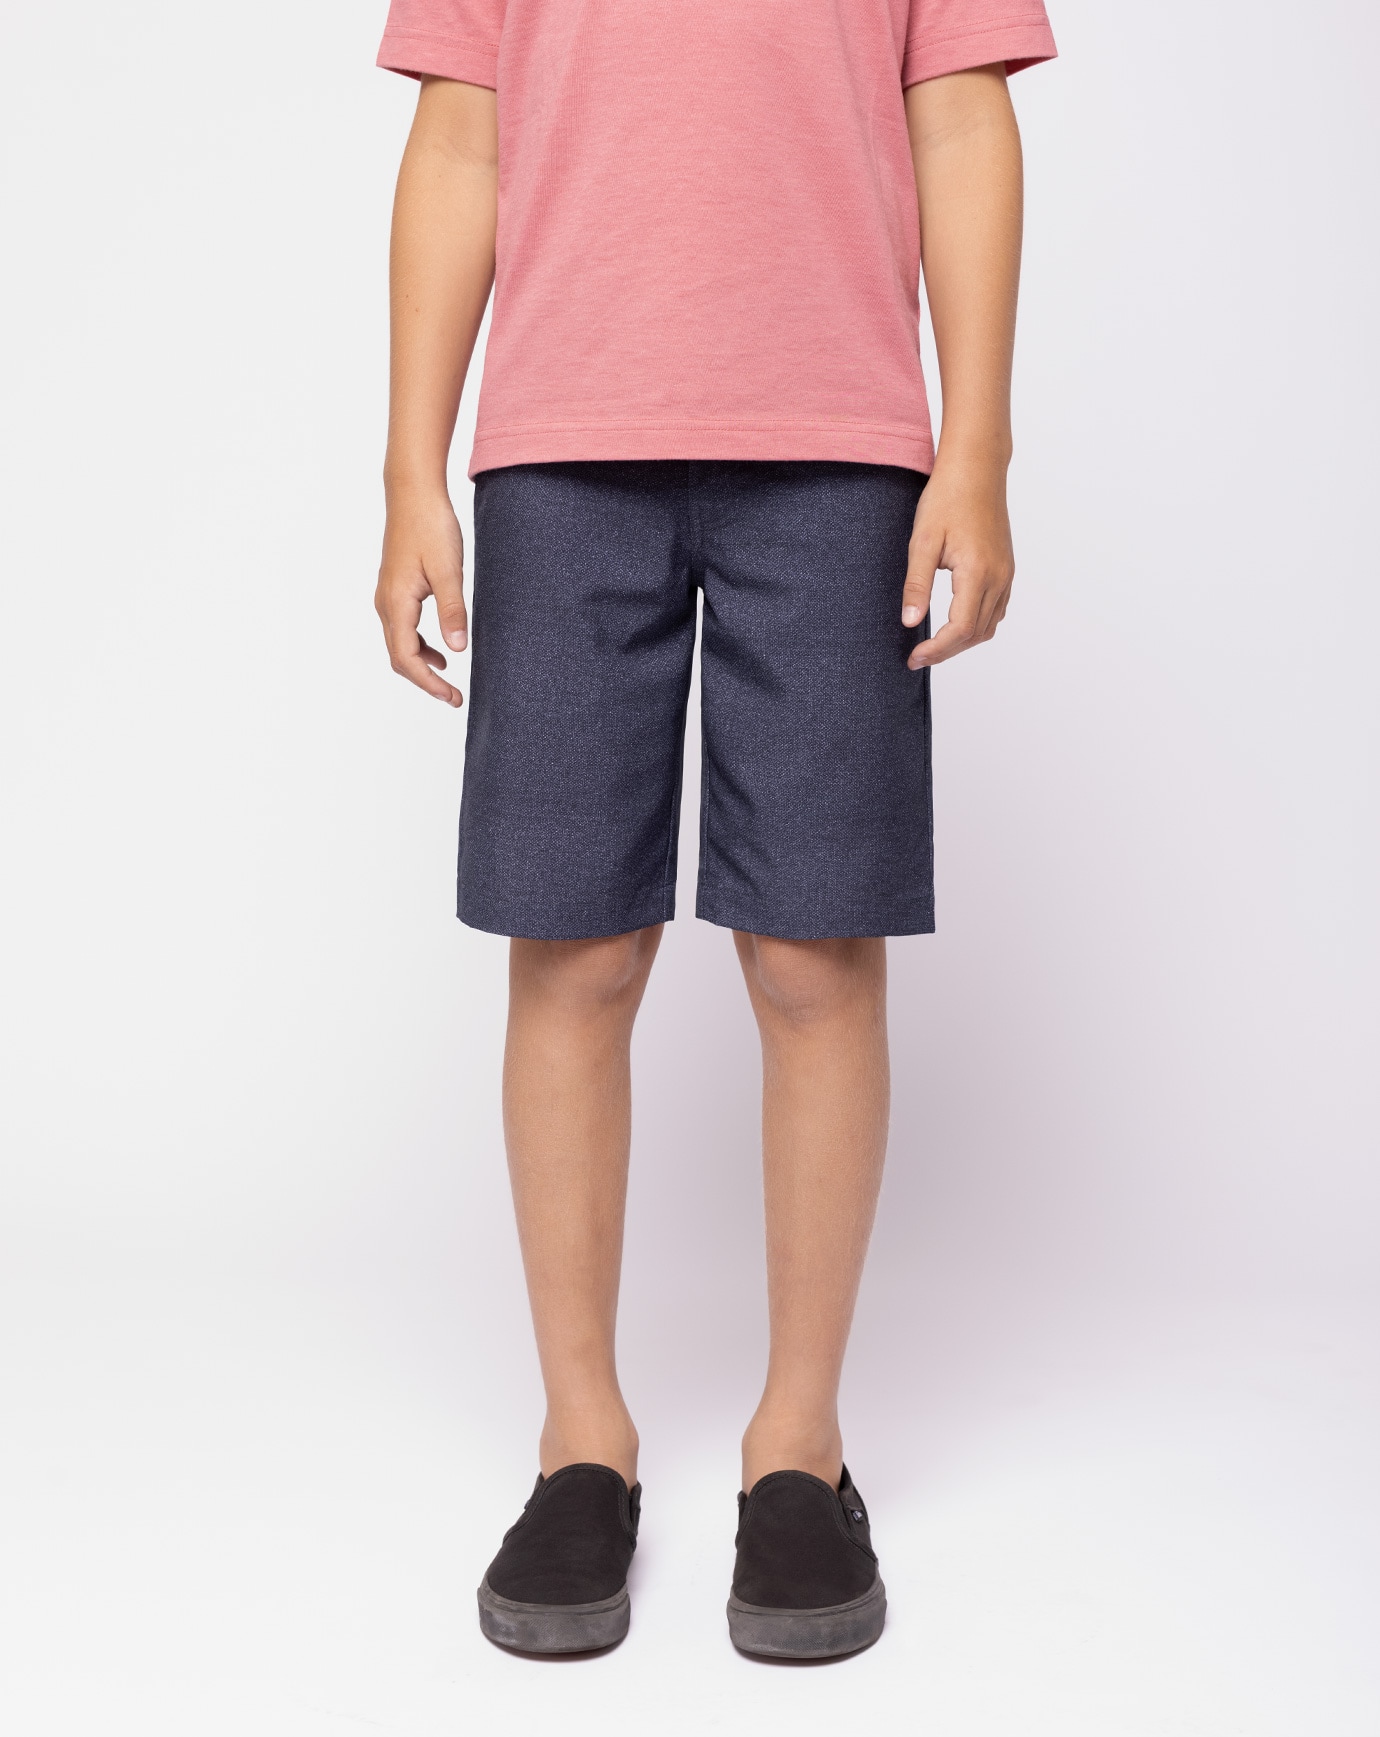 Related Product - PANAMA YOUTH SHORT